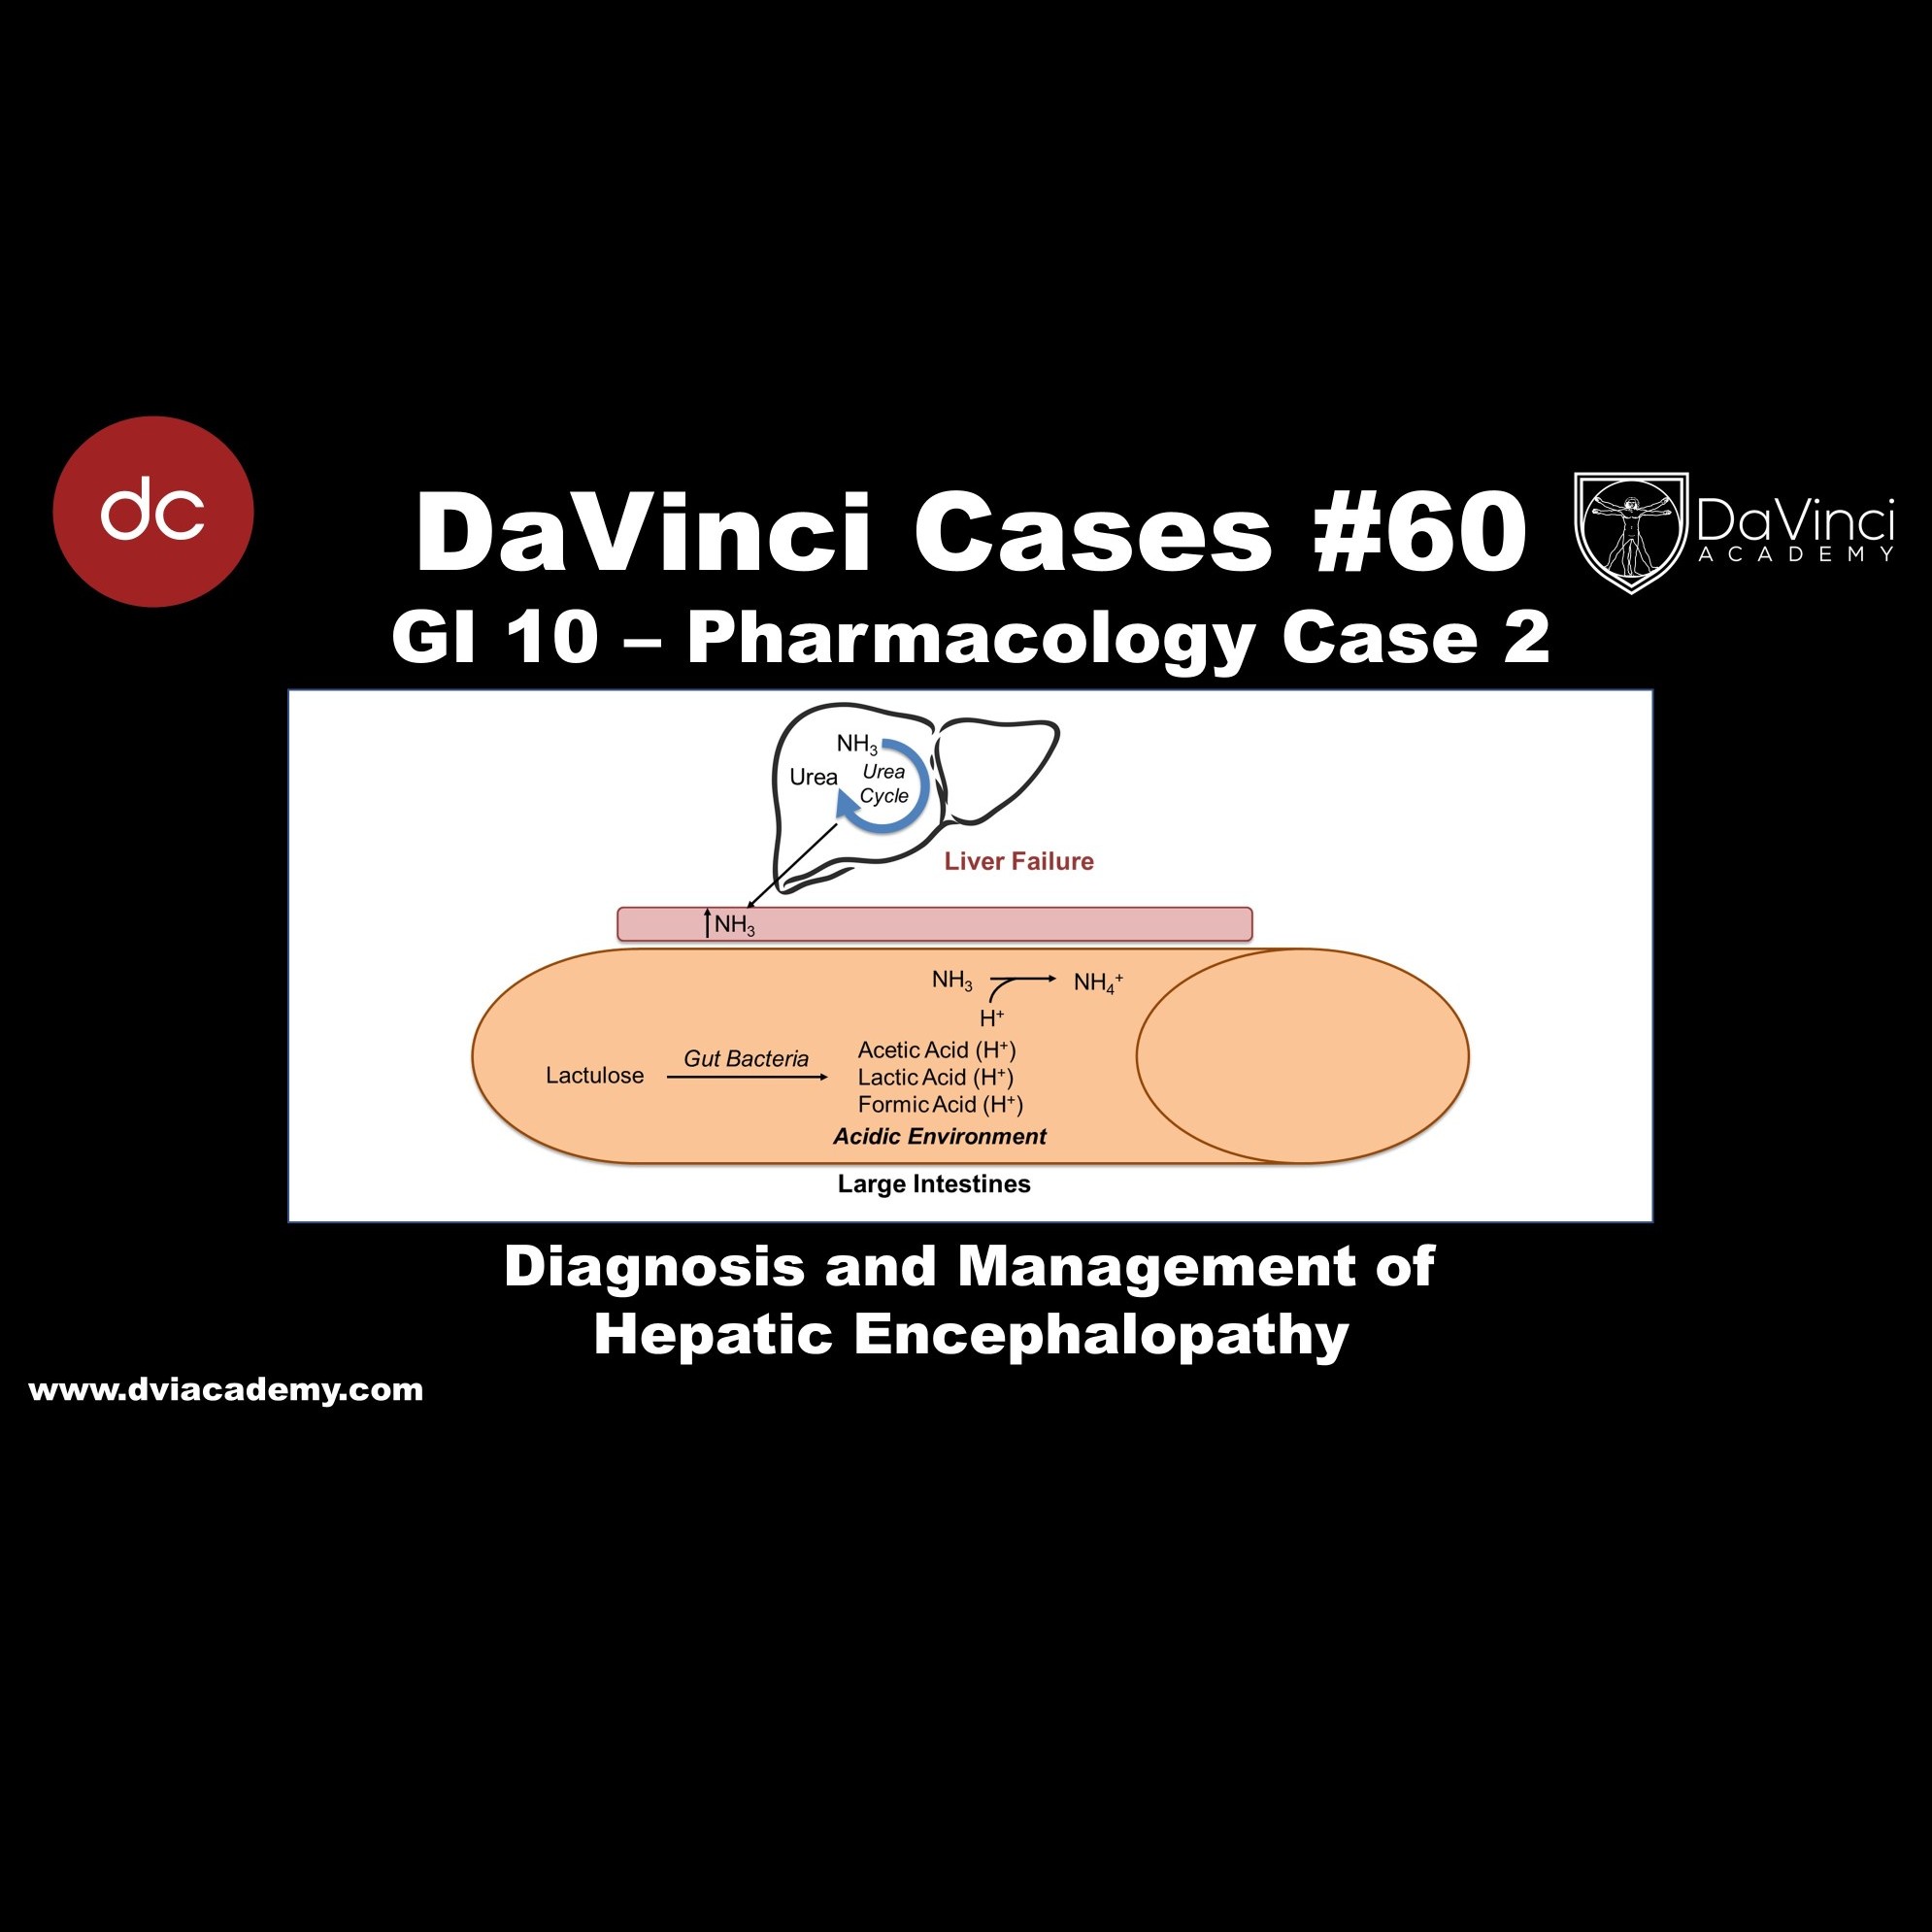 Diagnosis and Management of Hepatic Encephalopathy [#DaVinciCases GI 10 - Pharmacology Case 2]